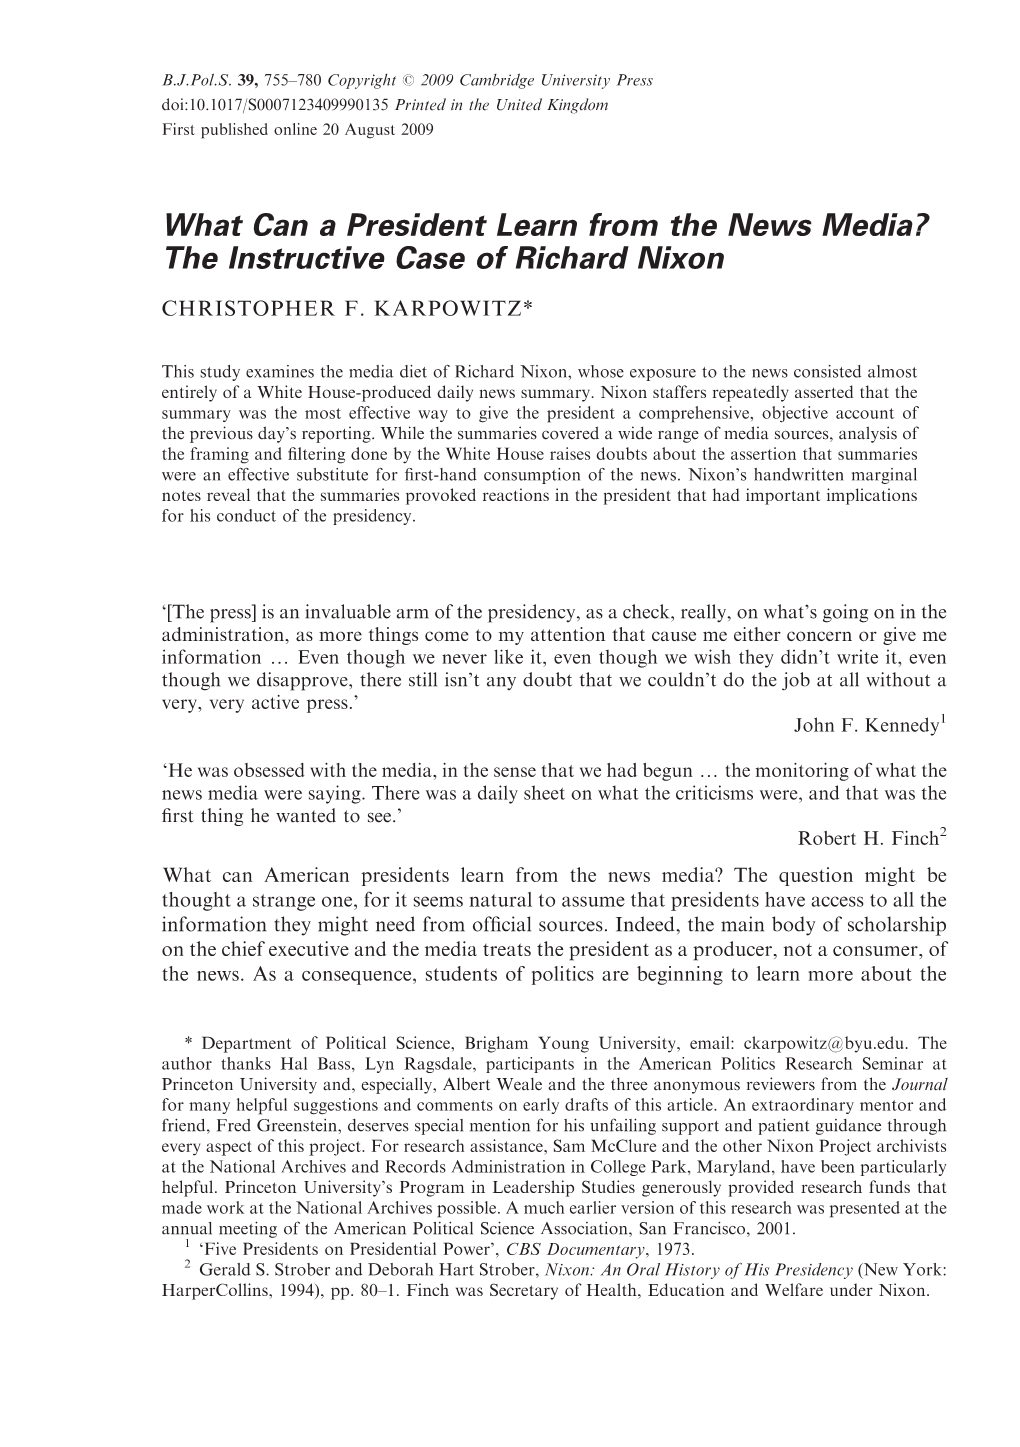 What Can a President Learn from the News Media? the Instructive Case of Richard Nixon